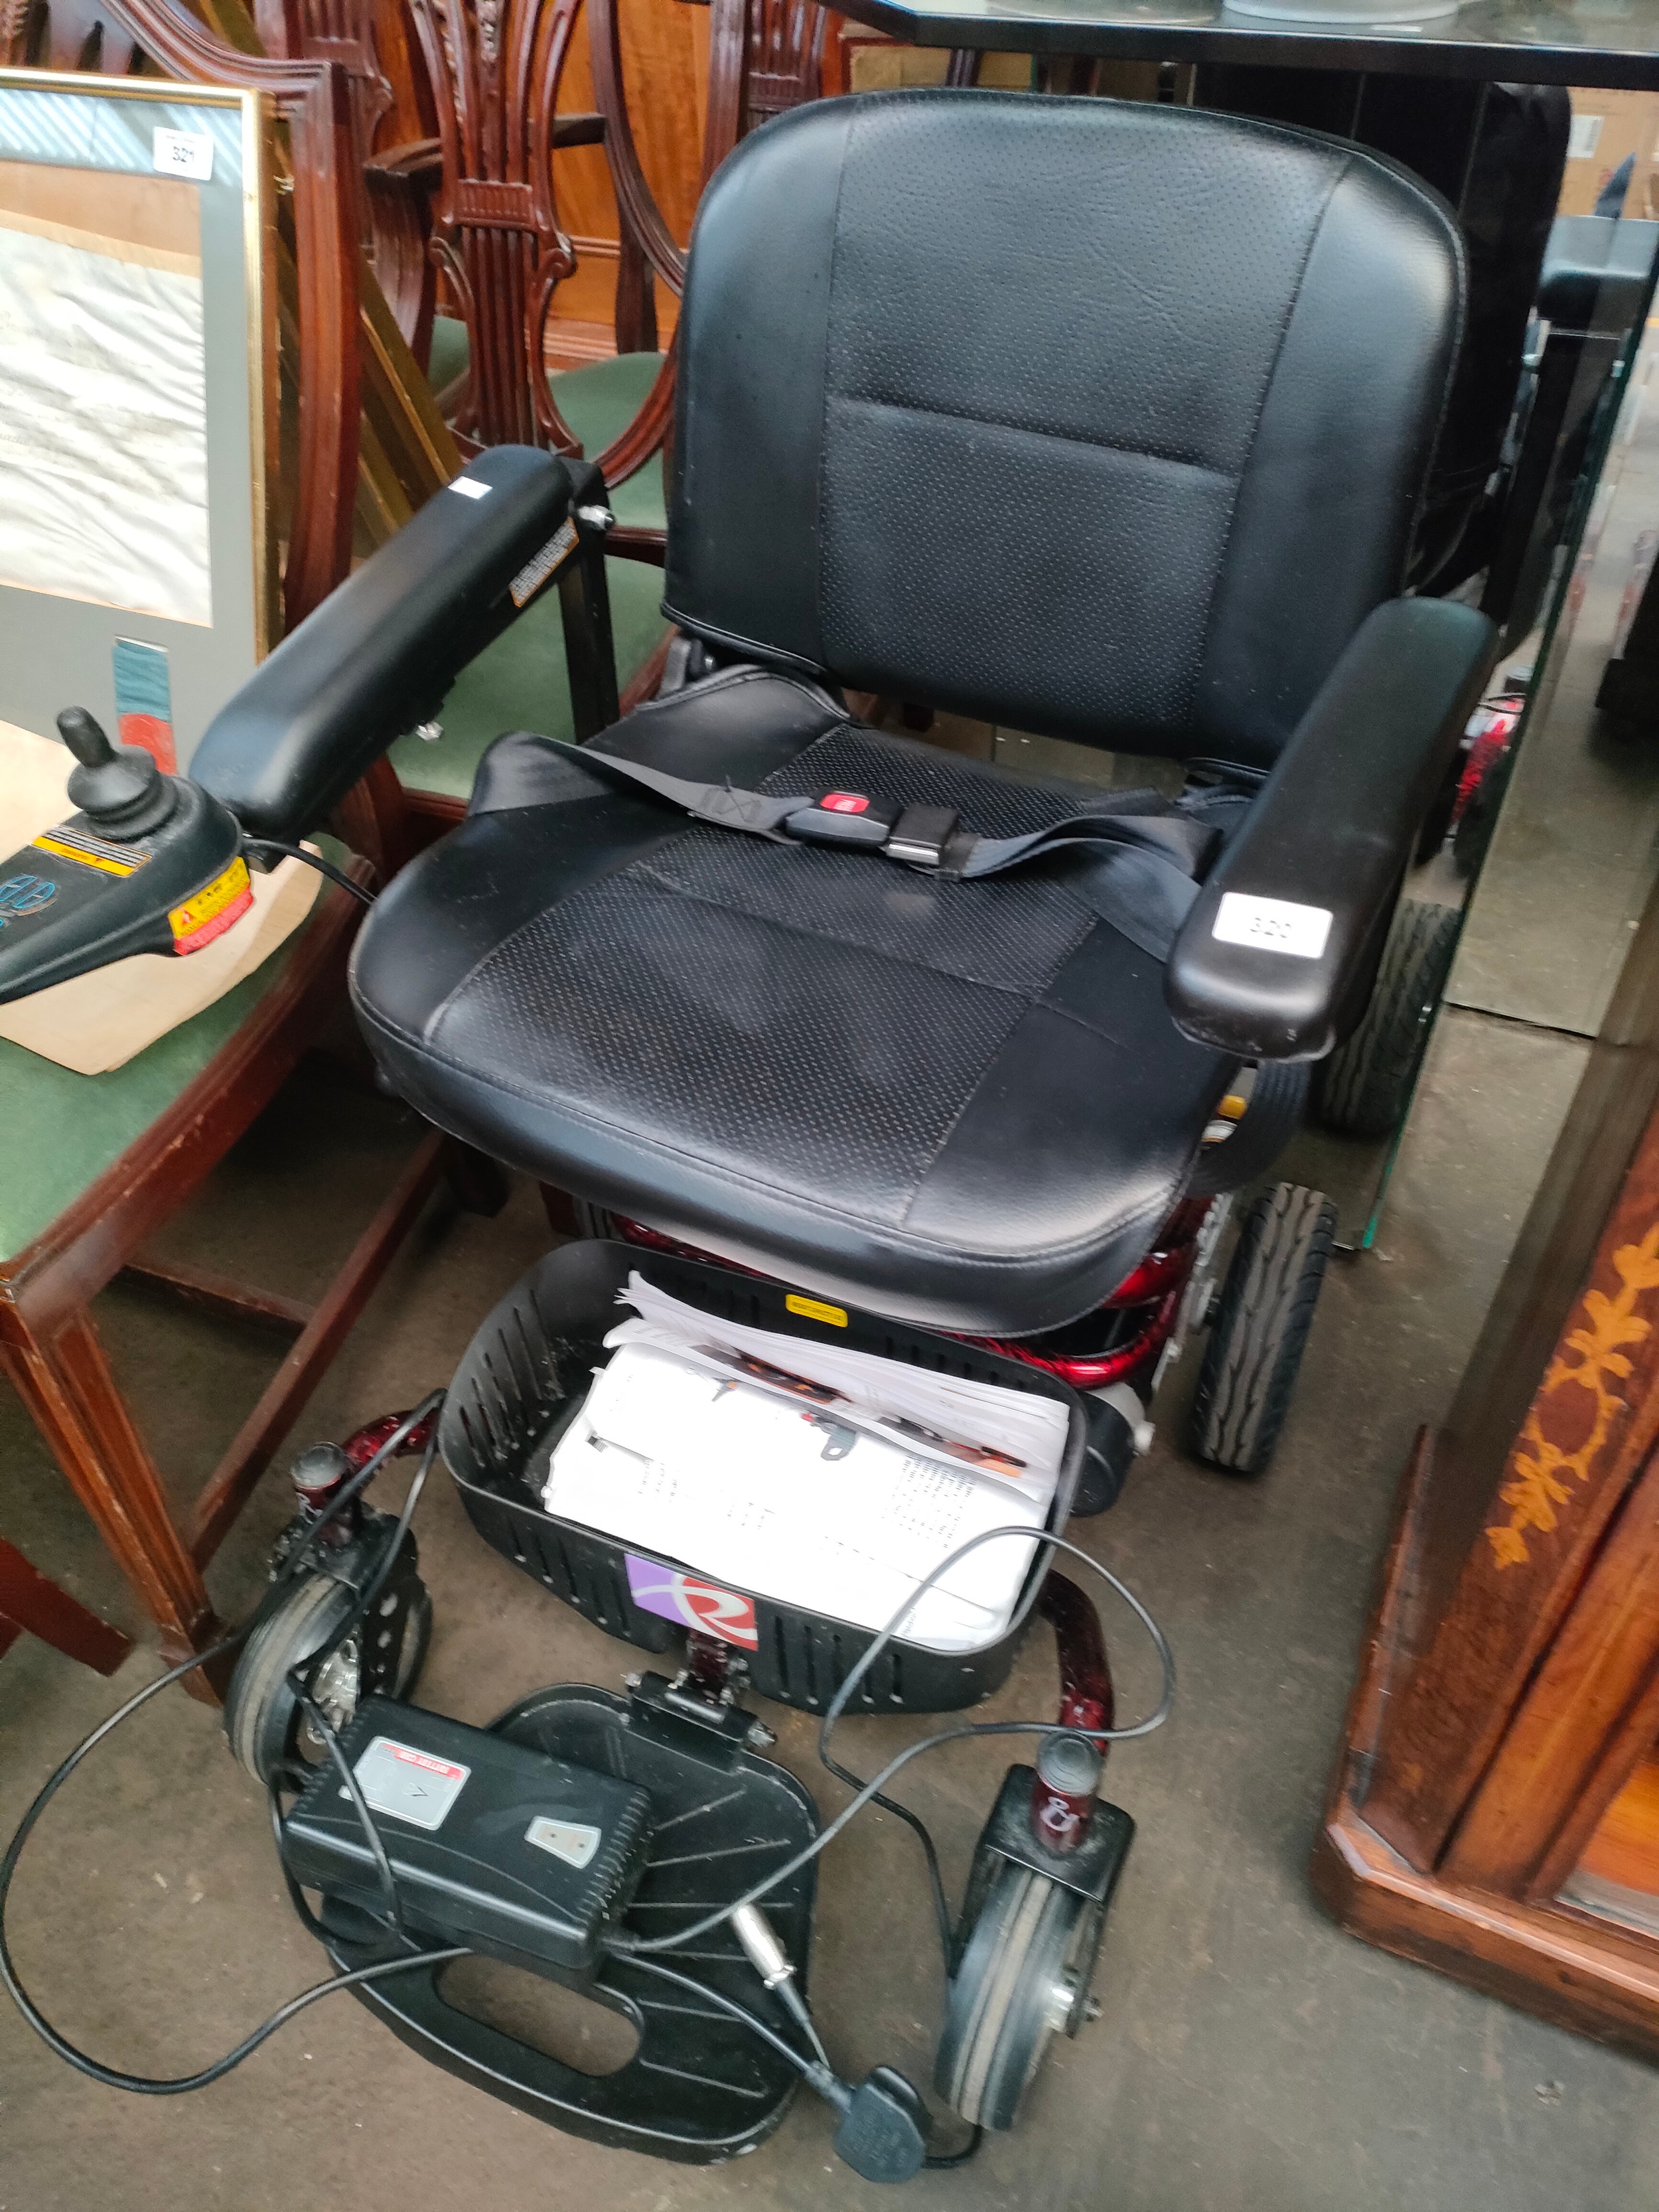 Roma Disability scooter, comes with charger and booklet. Not tested. - Image 3 of 3